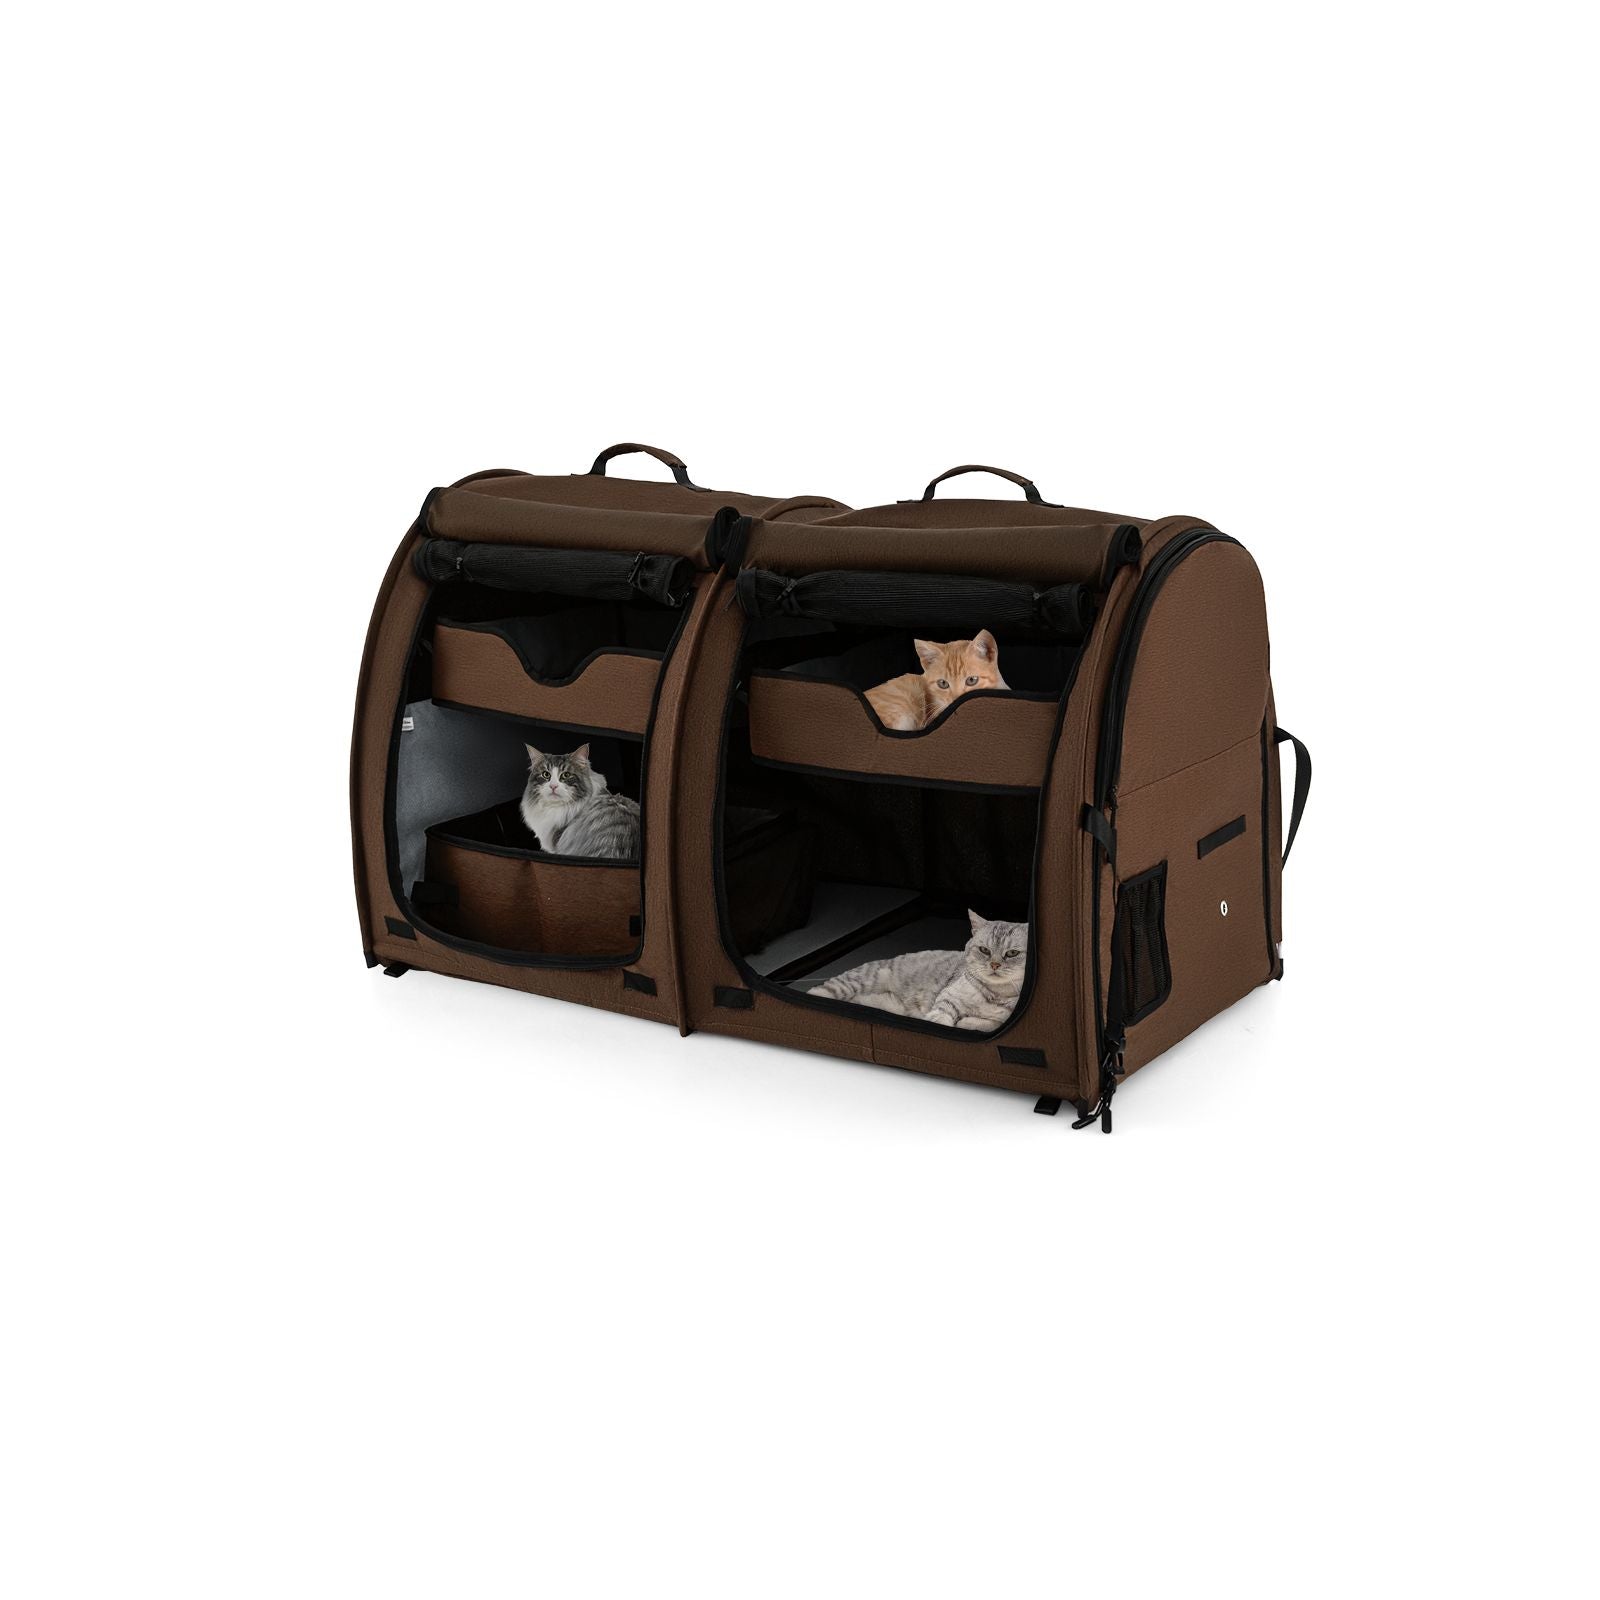 2 Compartments Pet Travel Carriers with Removable Hammocks and Mats